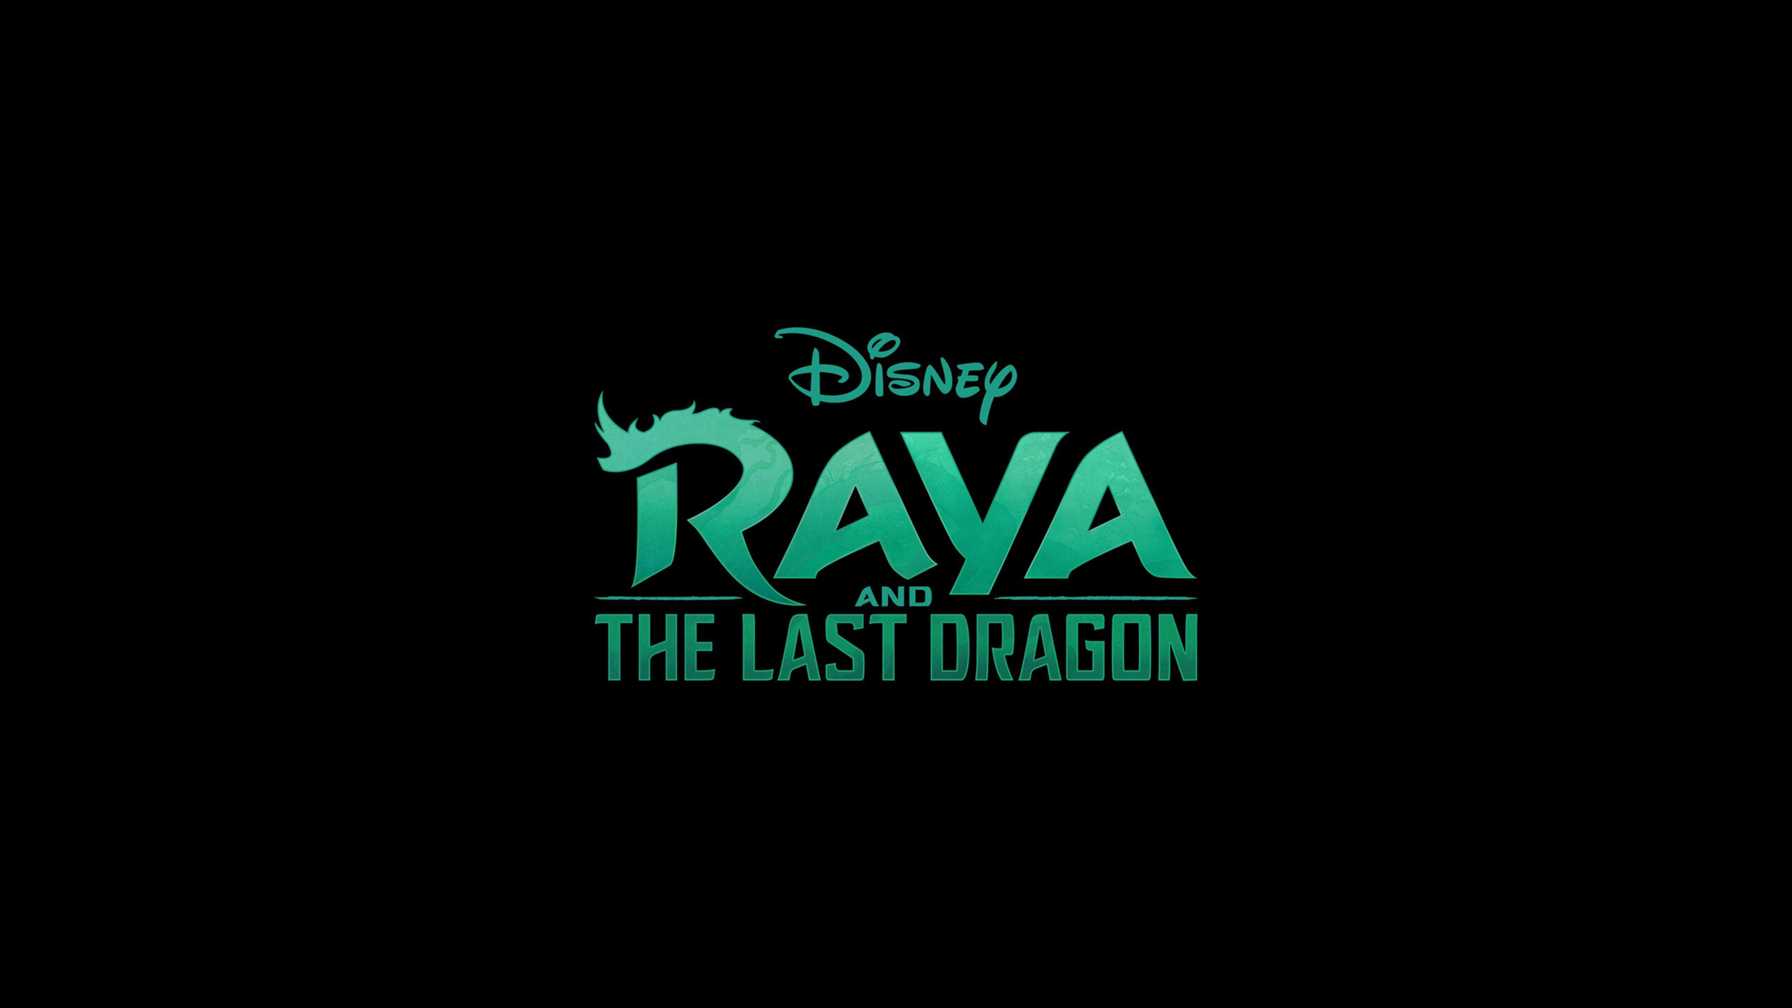 Raya and the Last Dragon Animated Trailer released by Disney